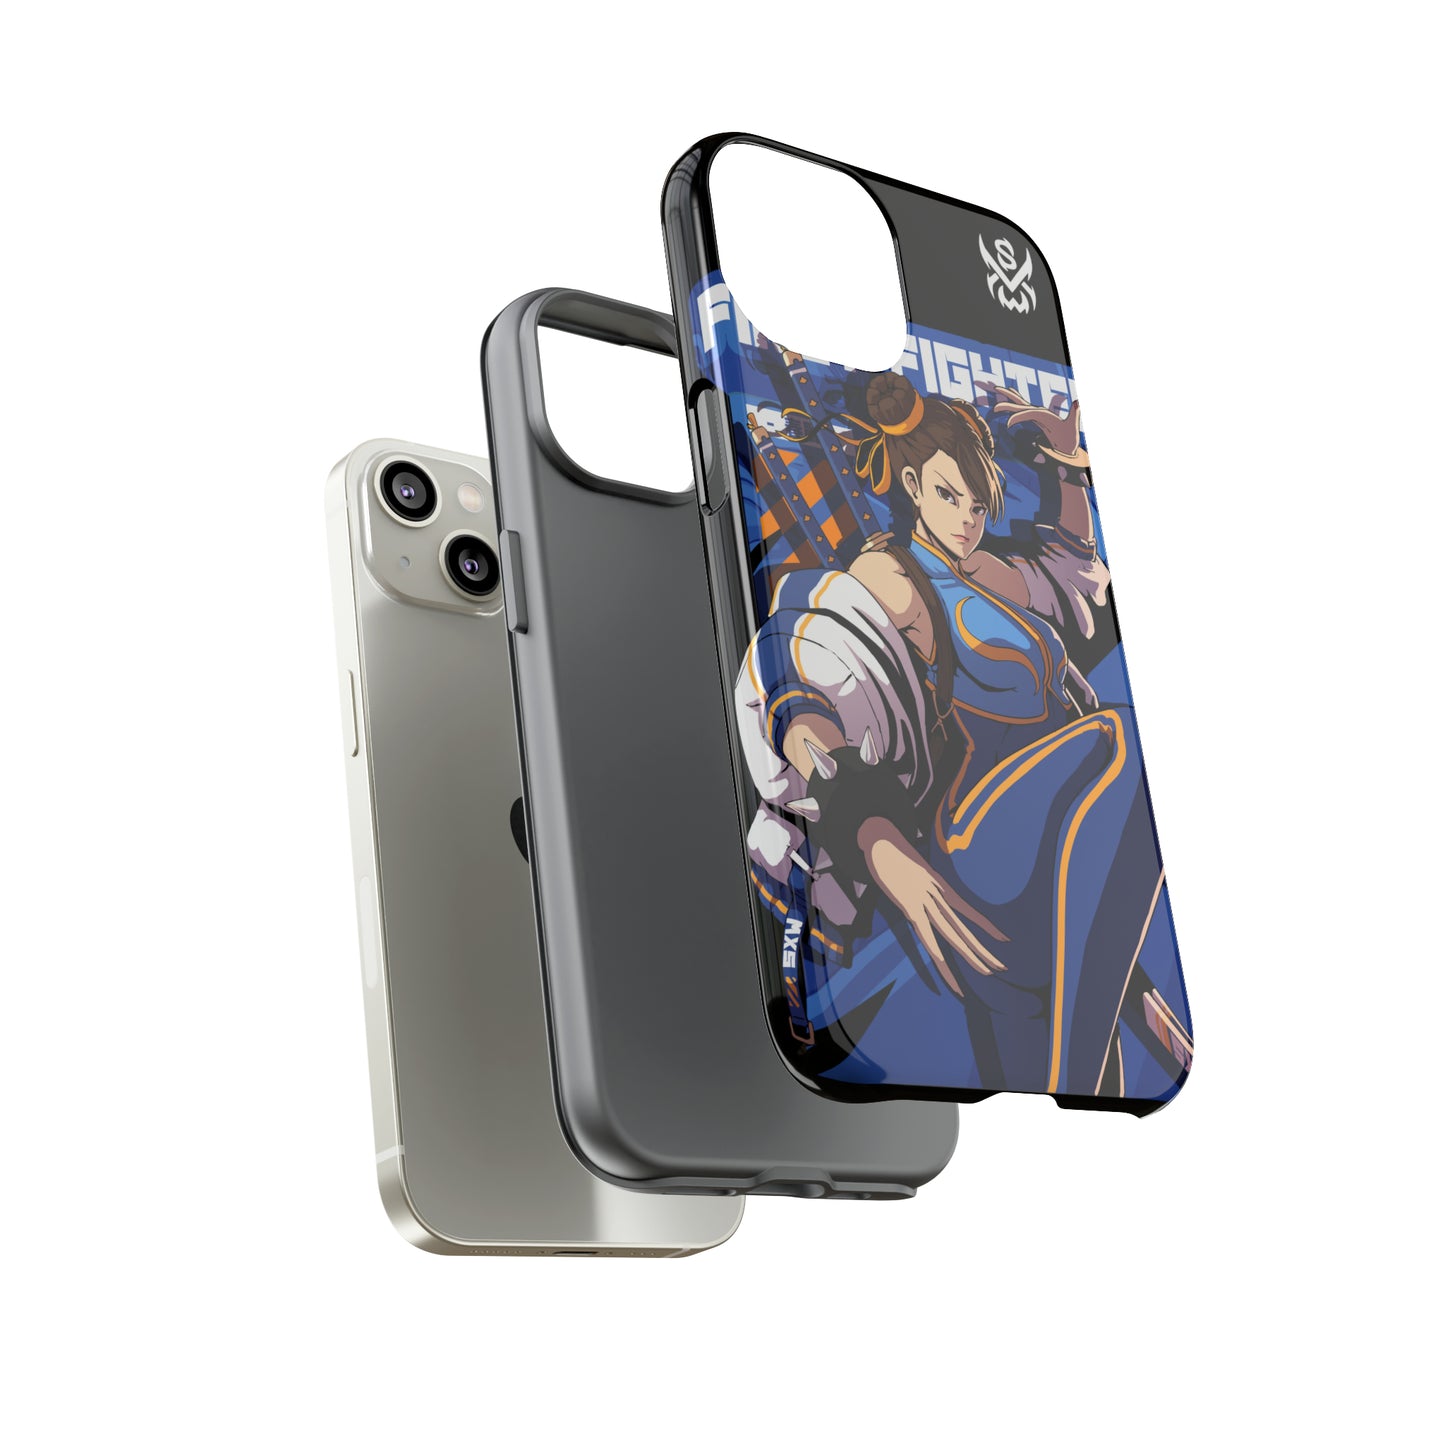 First Fighter / iPhone Case - LIMITED